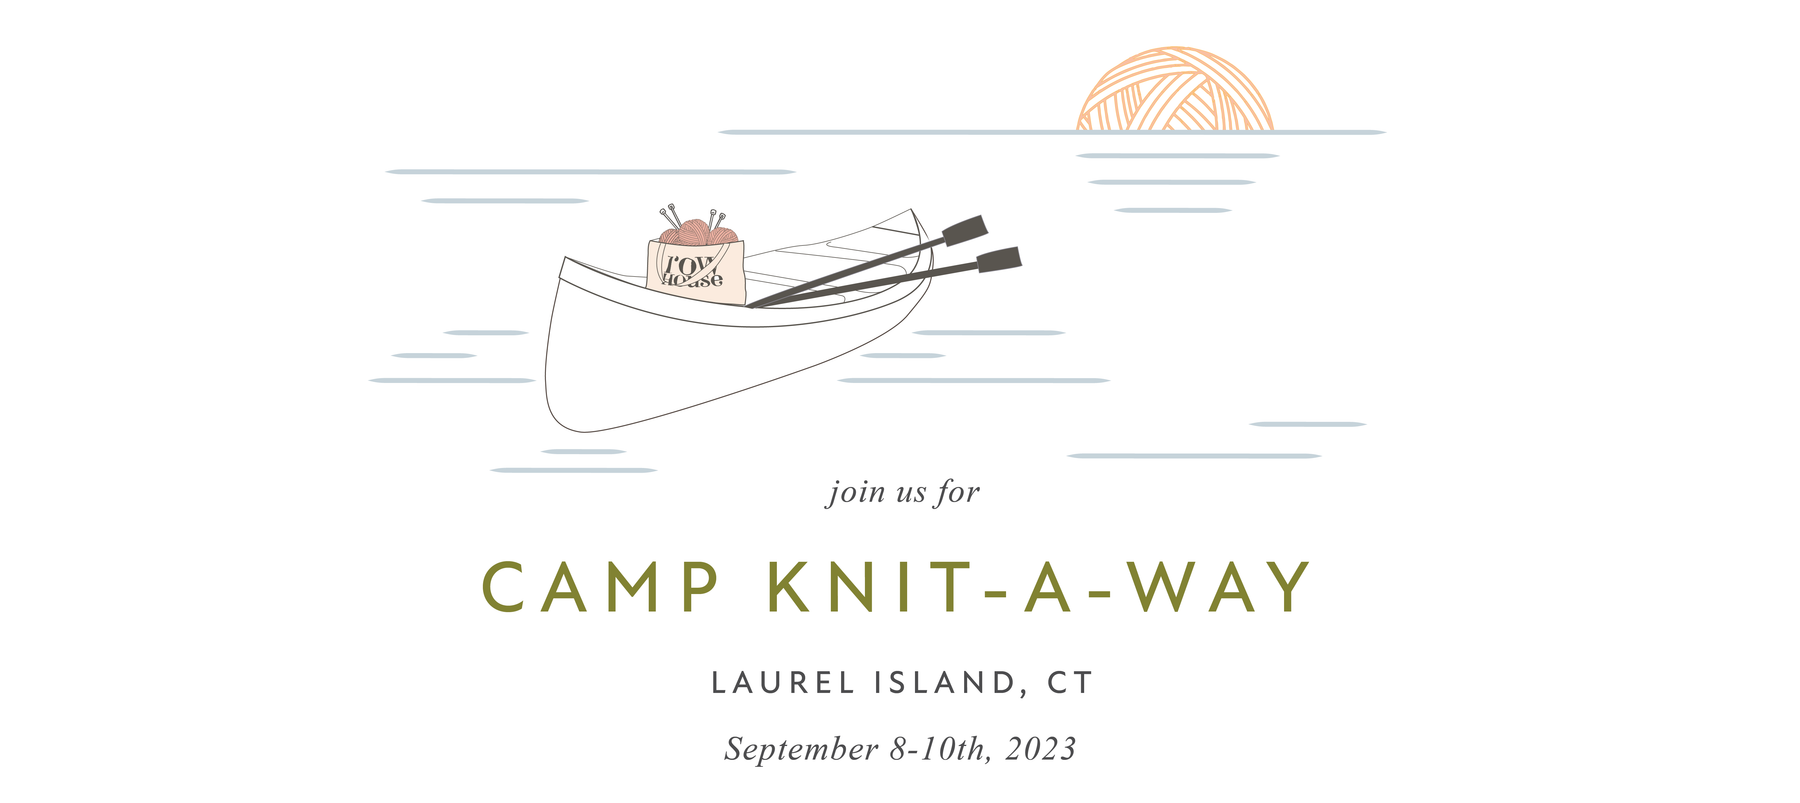 Join us for Camp Knit-a-way in Connecticut